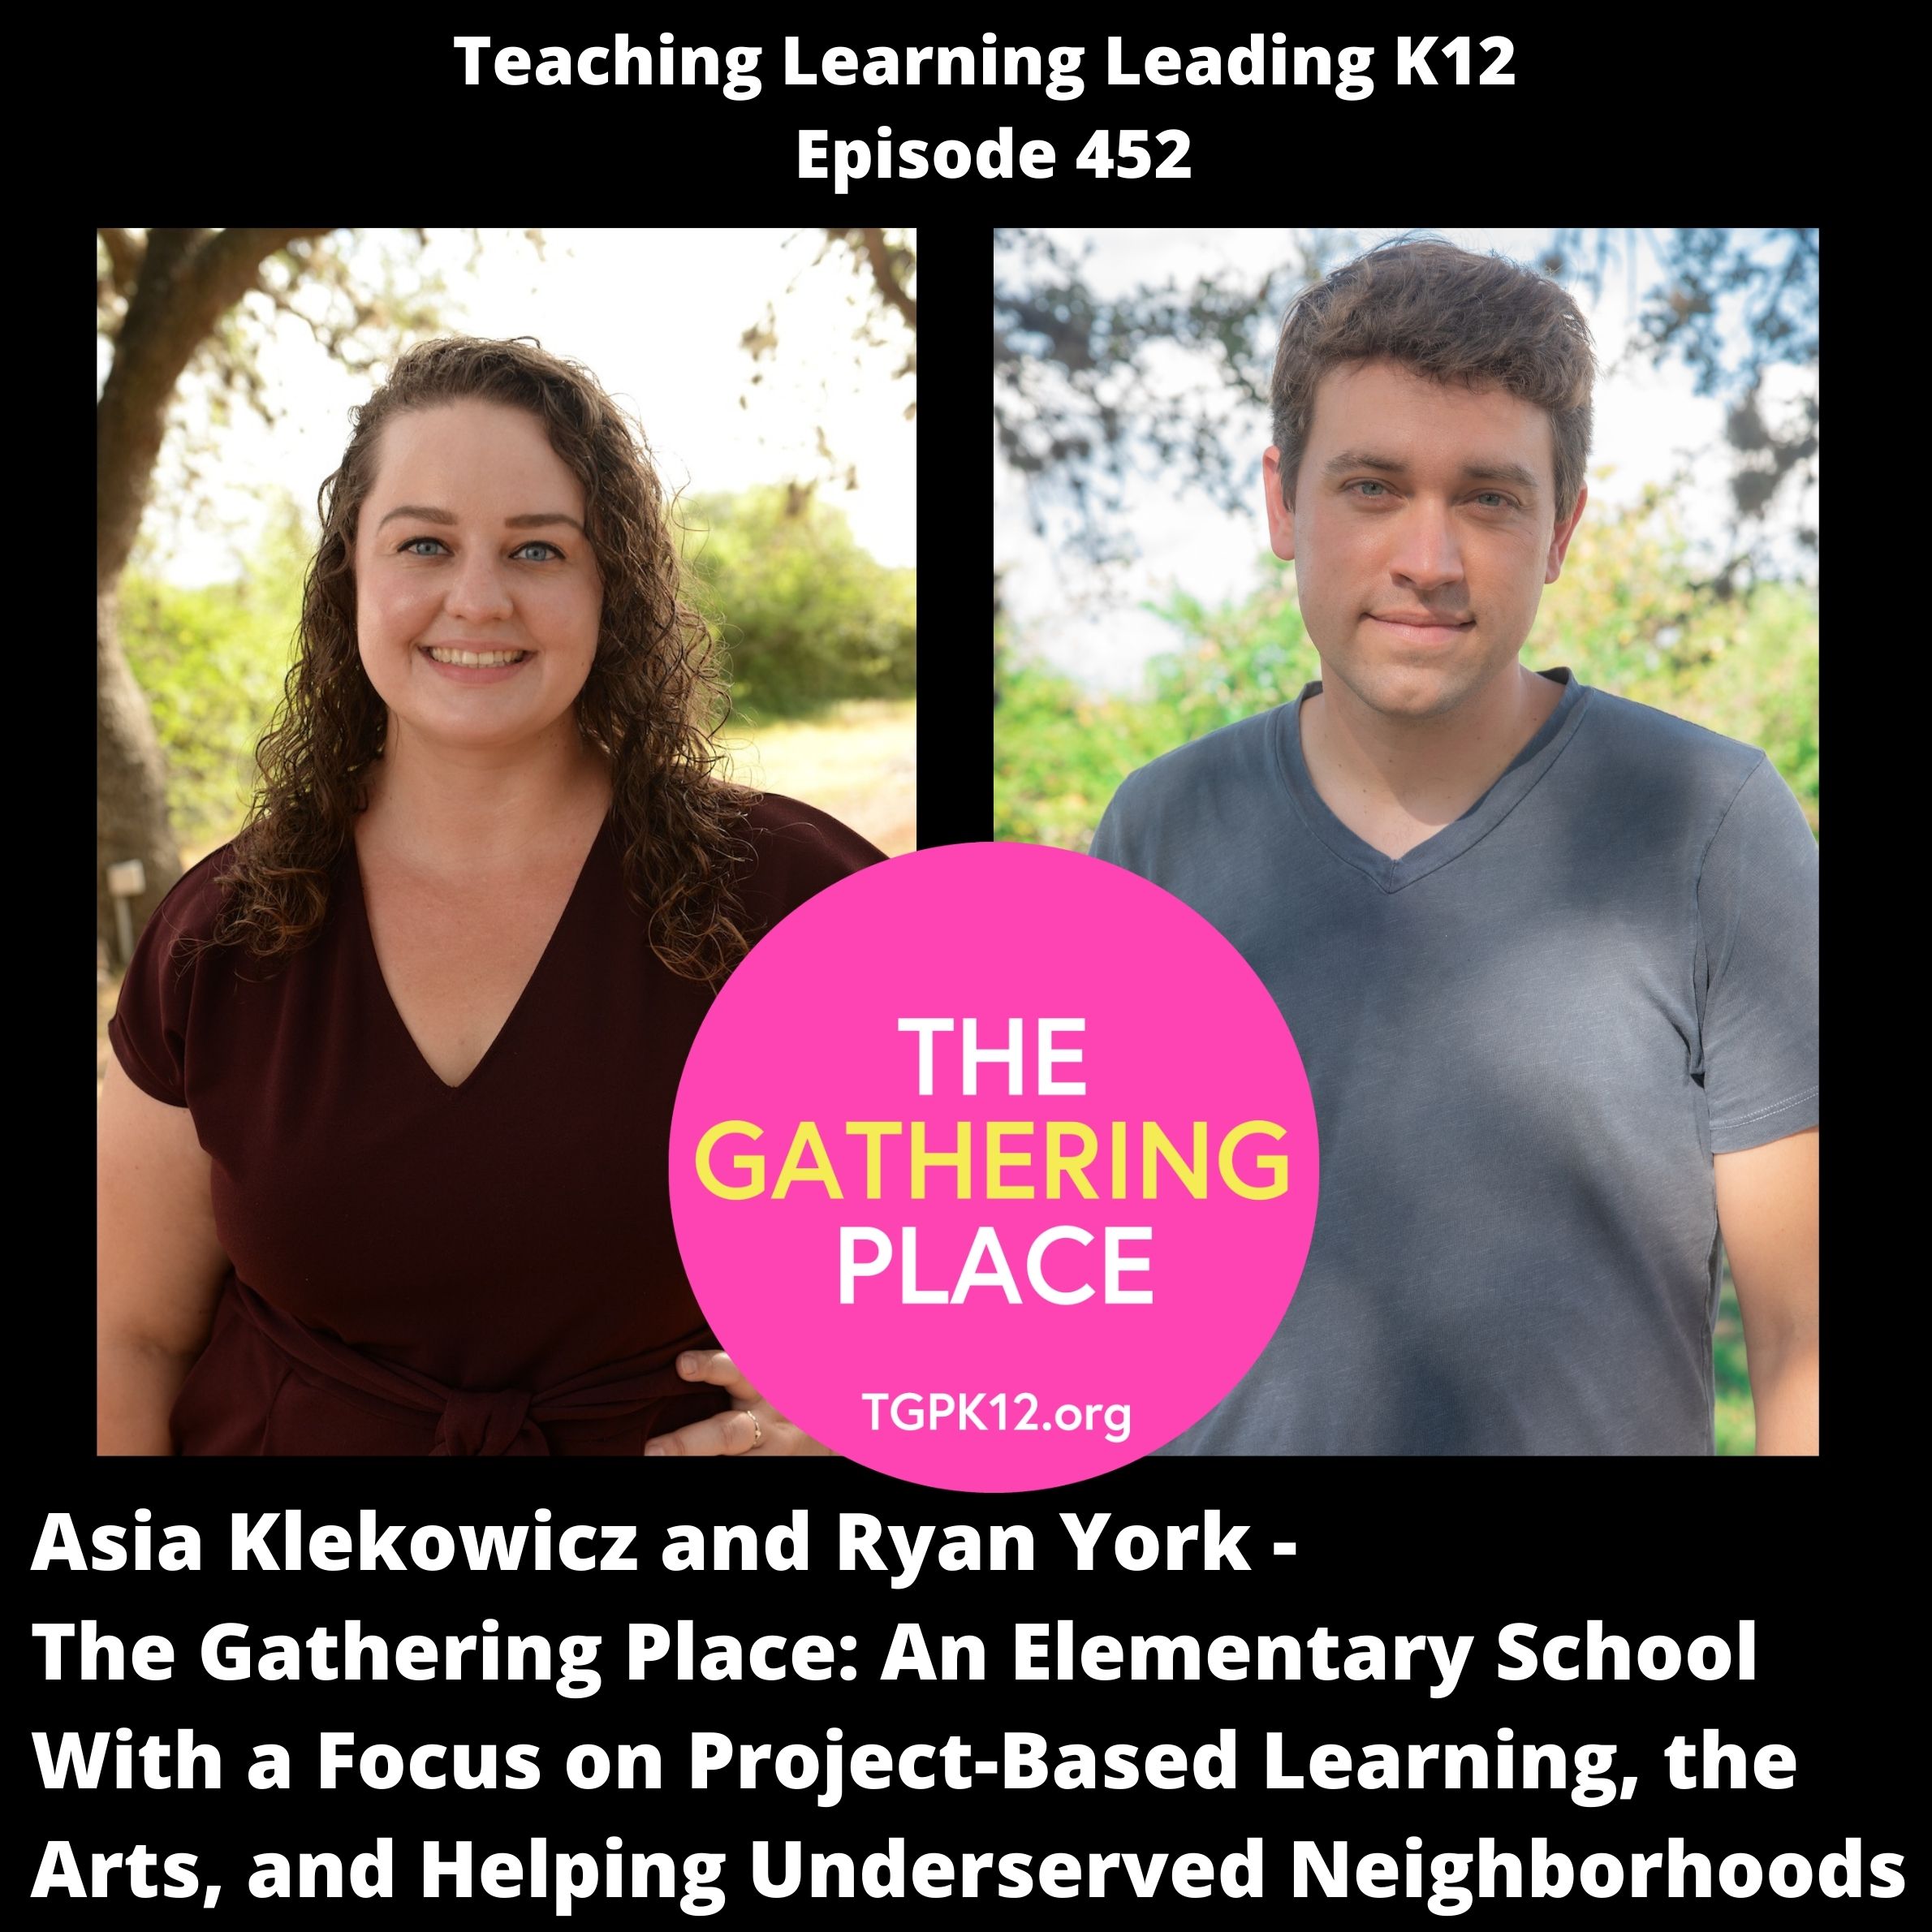 Asia Klekowicz and Ryan York - The Gathering Place: An Elementary School With a Focus on Project-Based Learning, the Arts, and Helping Underserved Neighborhoods - 452